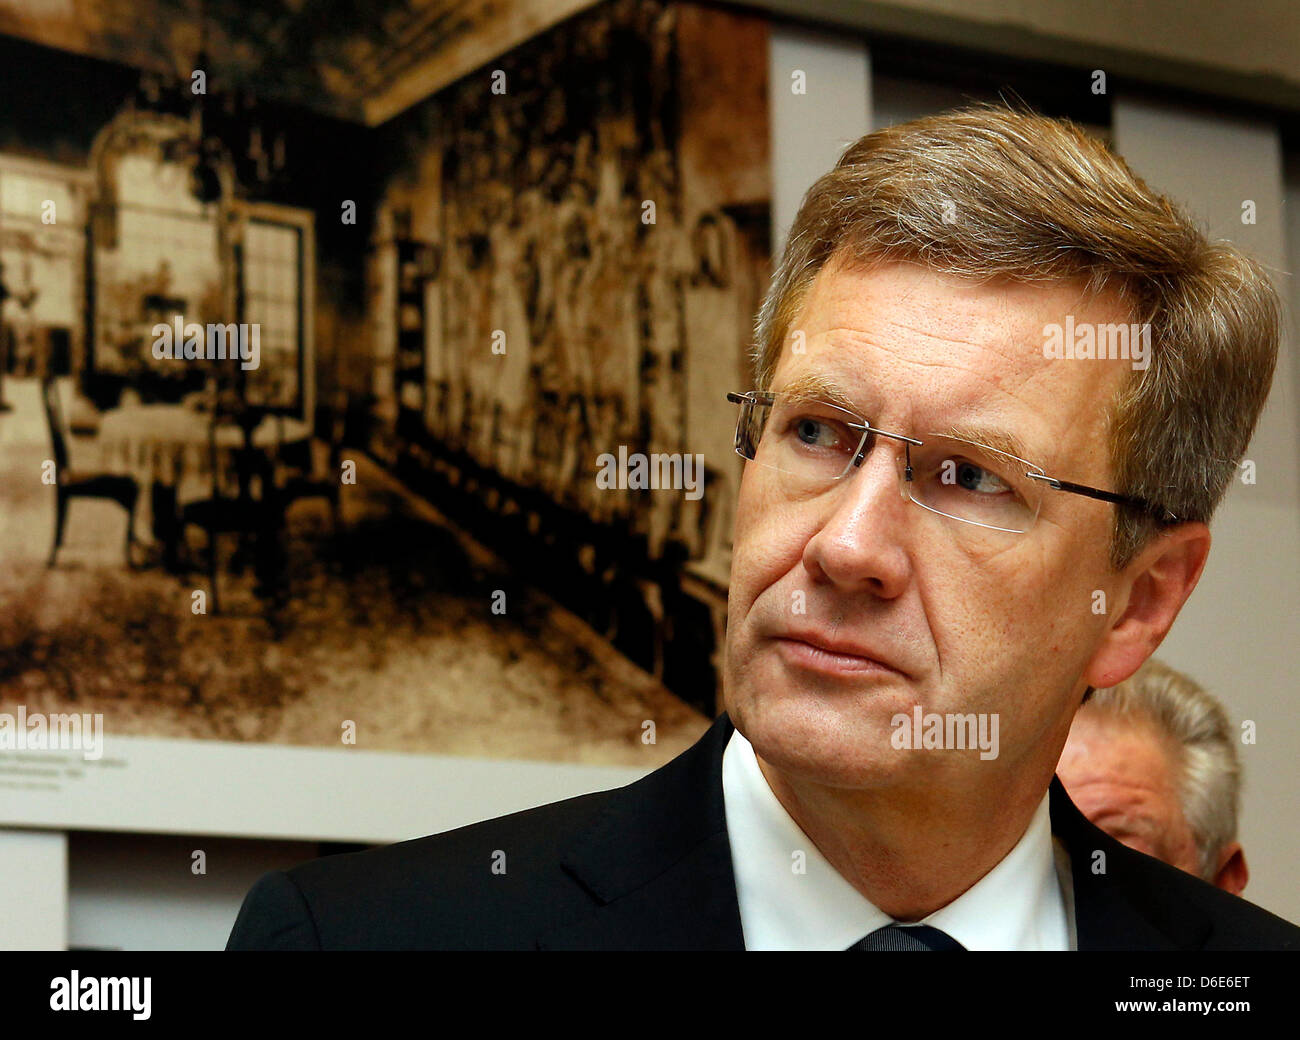 German President Christian Wulff listens to explanations of the director of the memorial and educational site House of the Wannsee Conference, Norbert Kampe (not in picture), during a commemorative event on the occasion of the 70th anniversary of the 'Wannsee Conference' at the House of the Wannsee Conference in Berlin, Germany, 20 January 2012. In this house - a former industriali Stock Photo